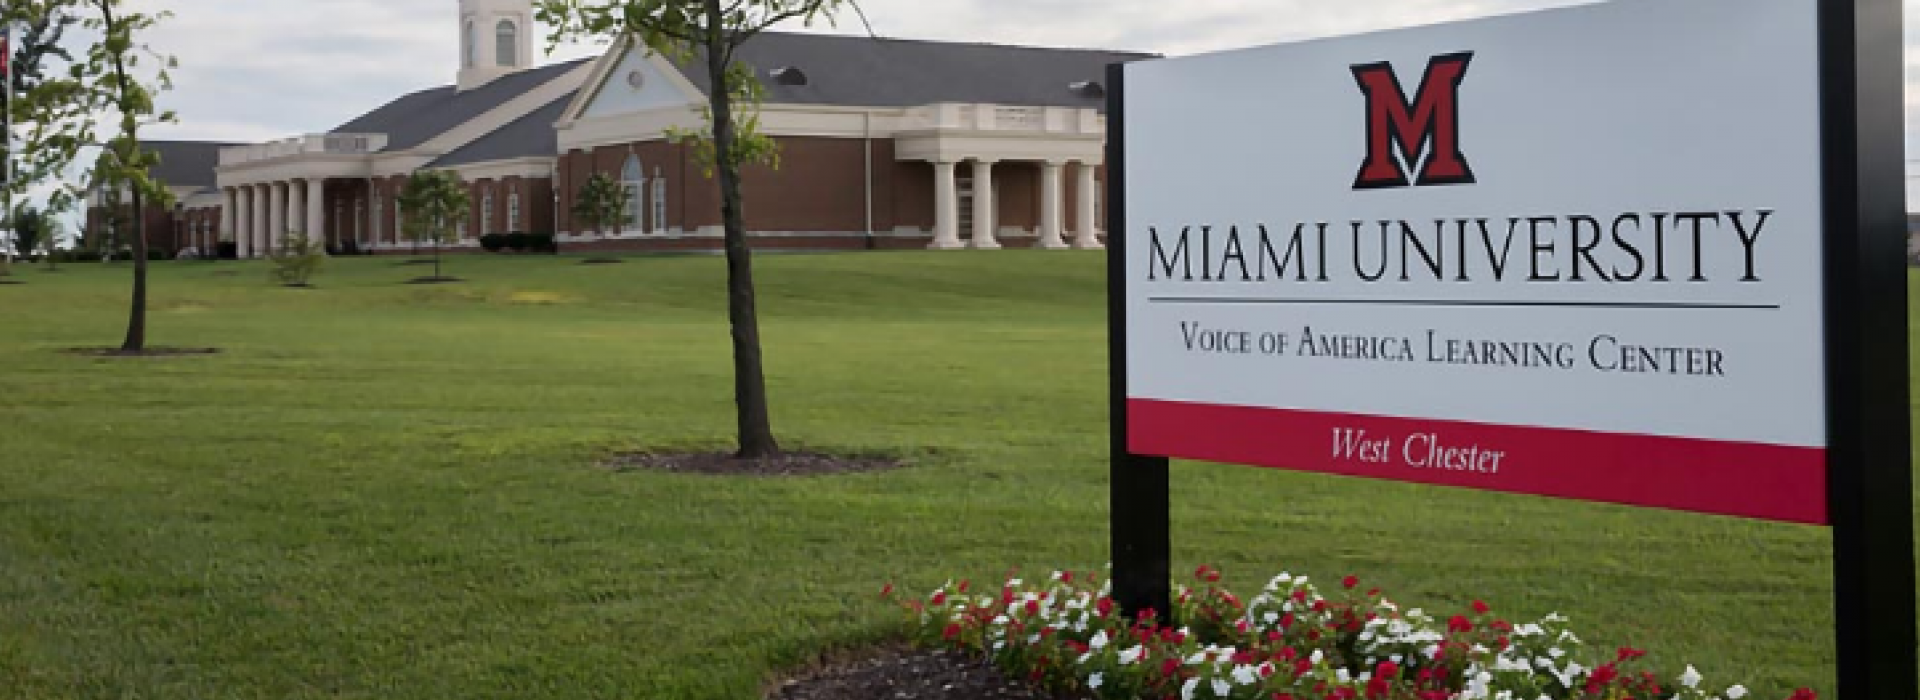 Miami University Voice of America Learning Center